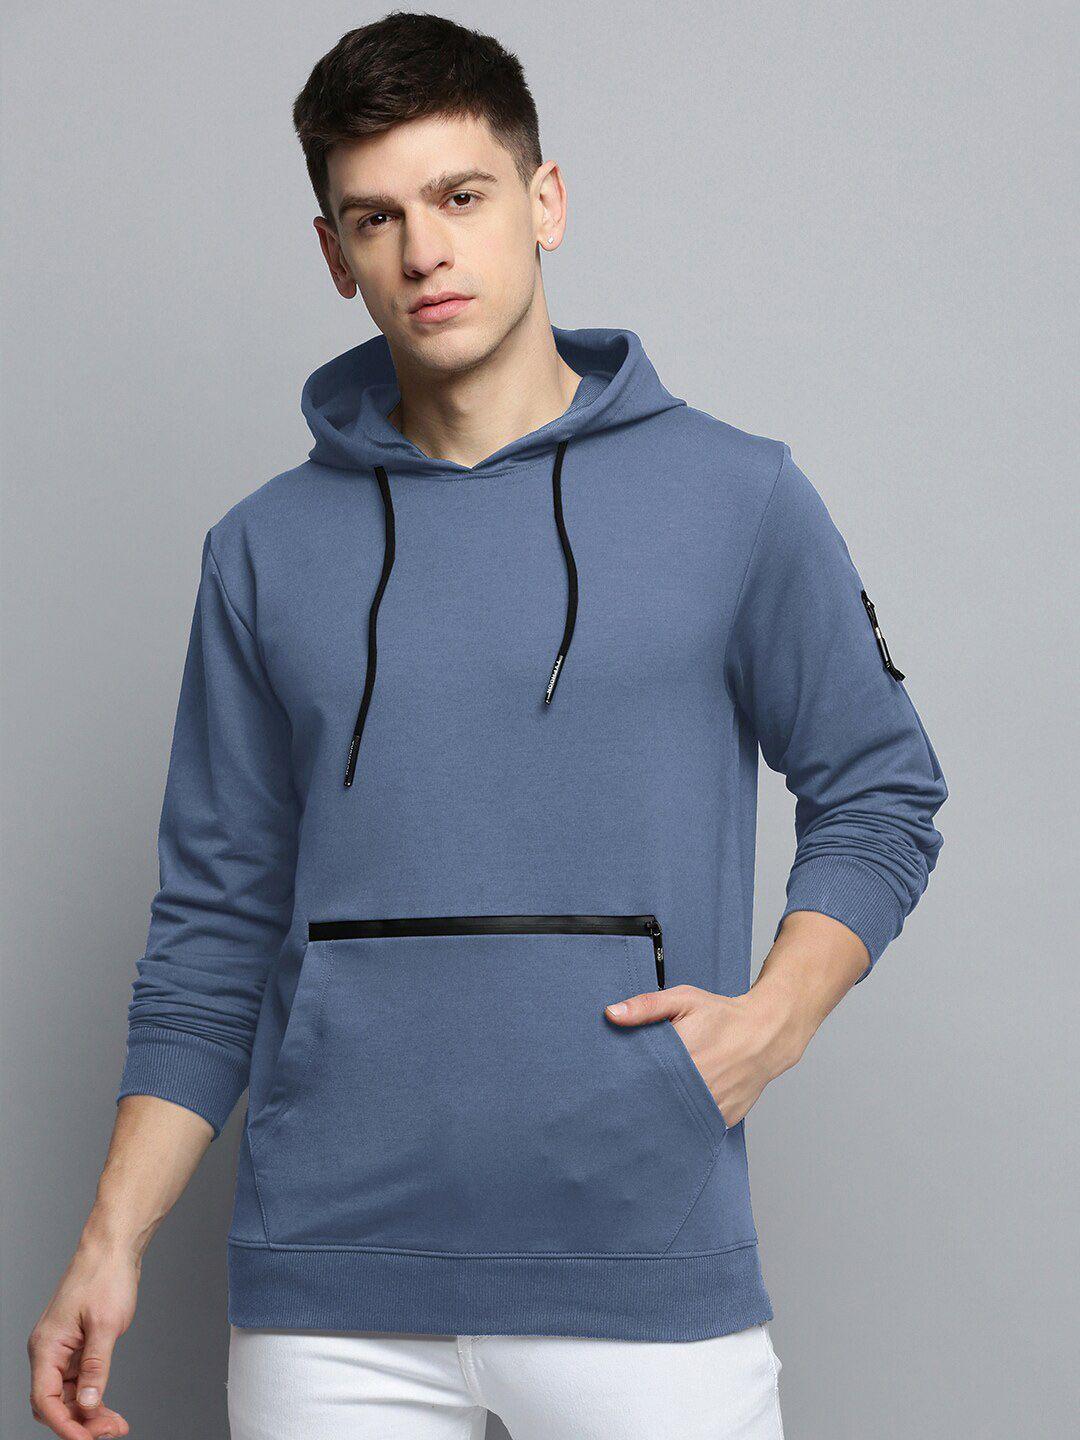 showoff hooded pullover cotton sweatshirt